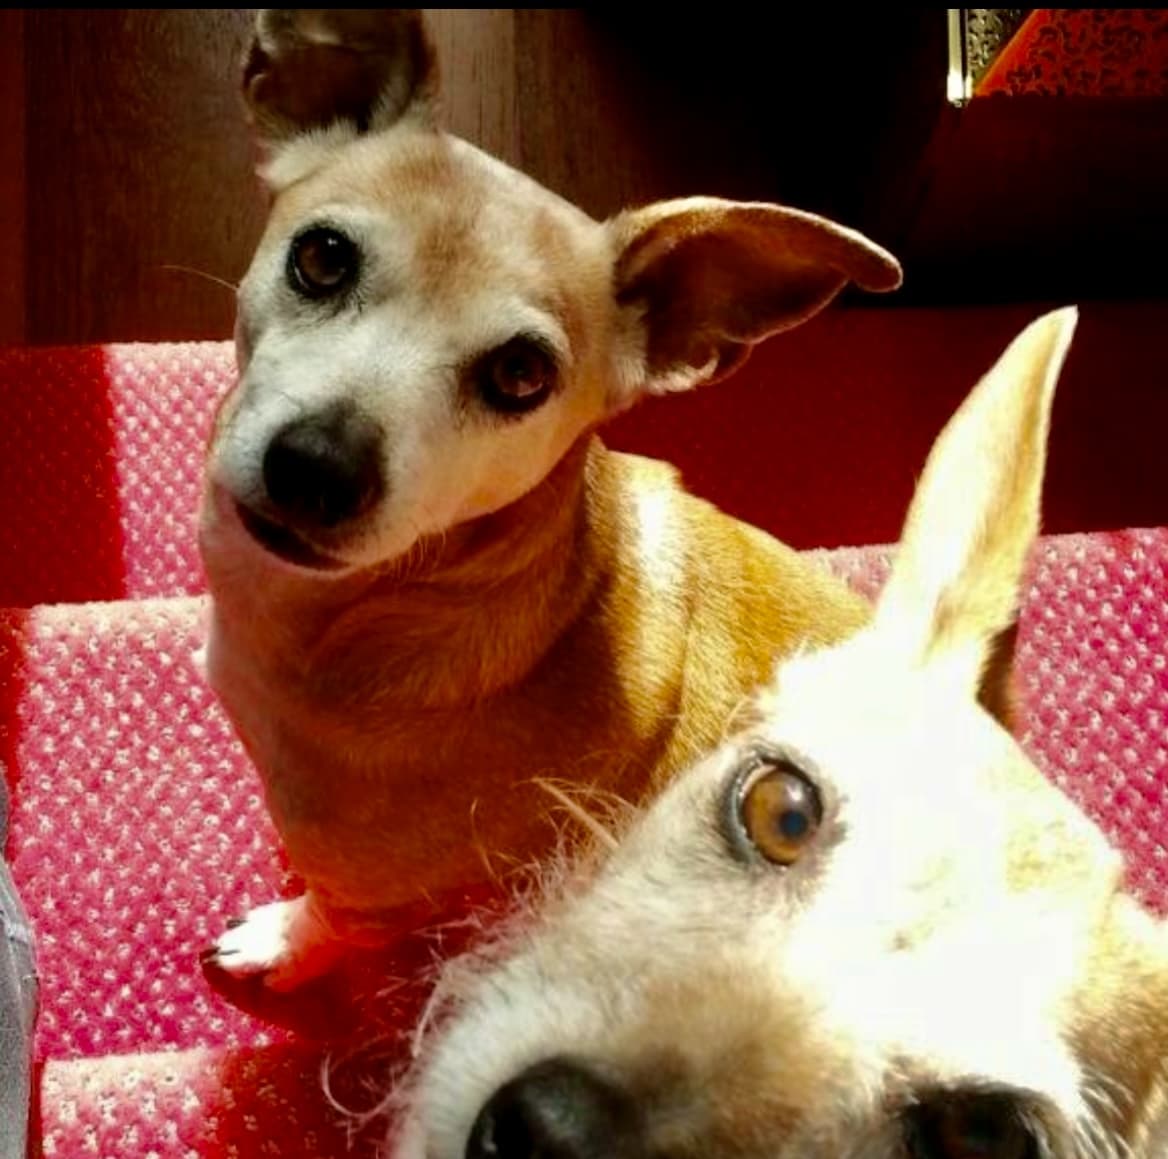 Lovable Lolita and Pepita live on in memory.